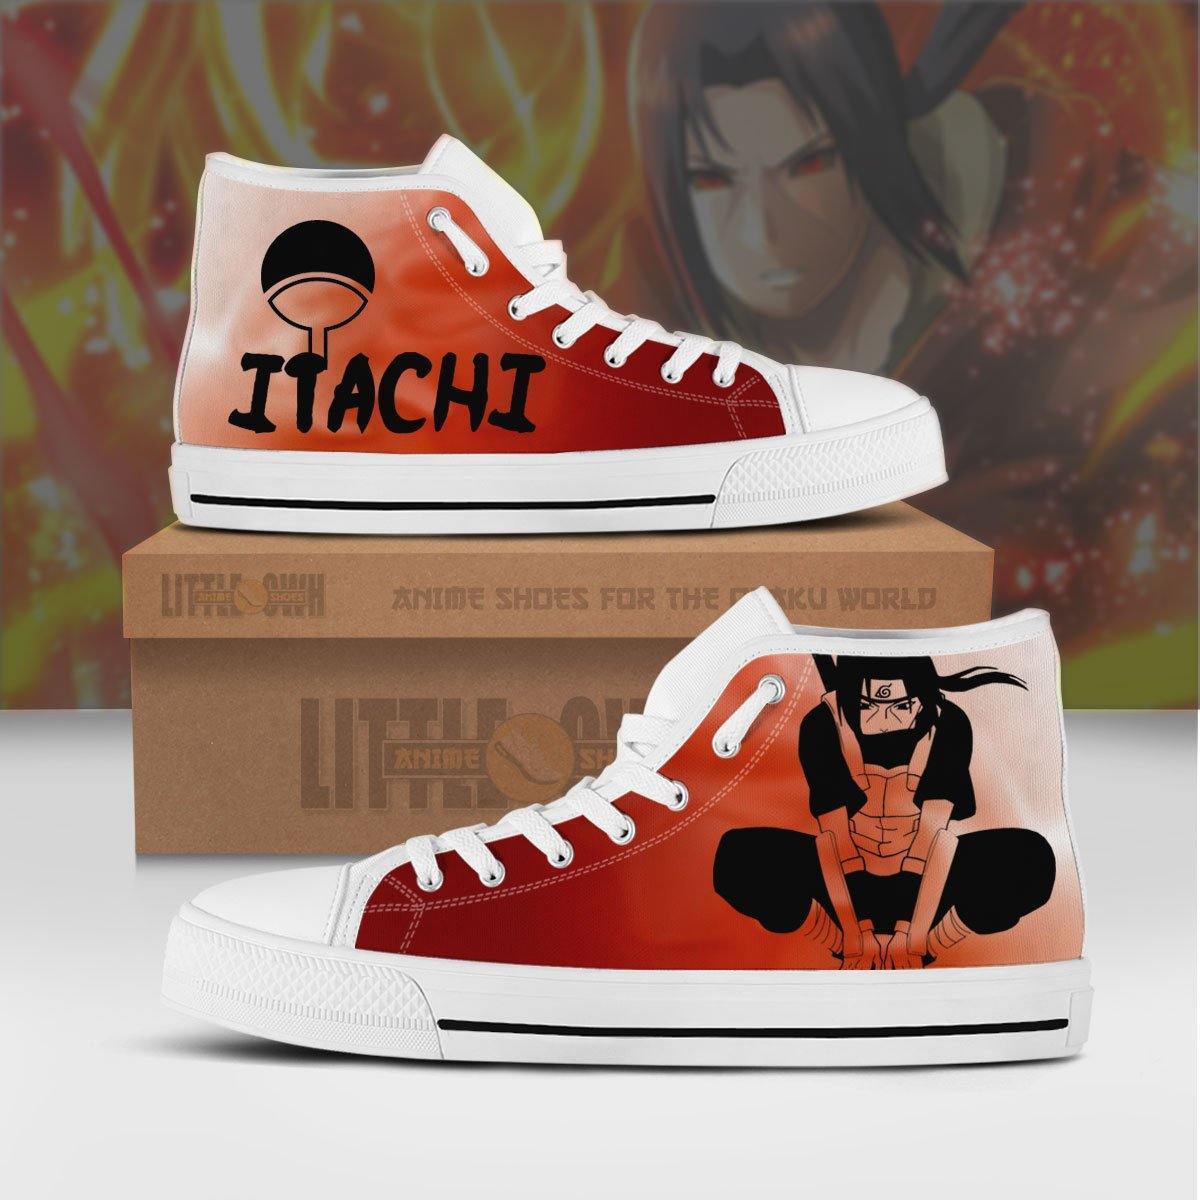 Itachi Naruto Anime Custom All Star High Top Sneakers Canvas Shoes